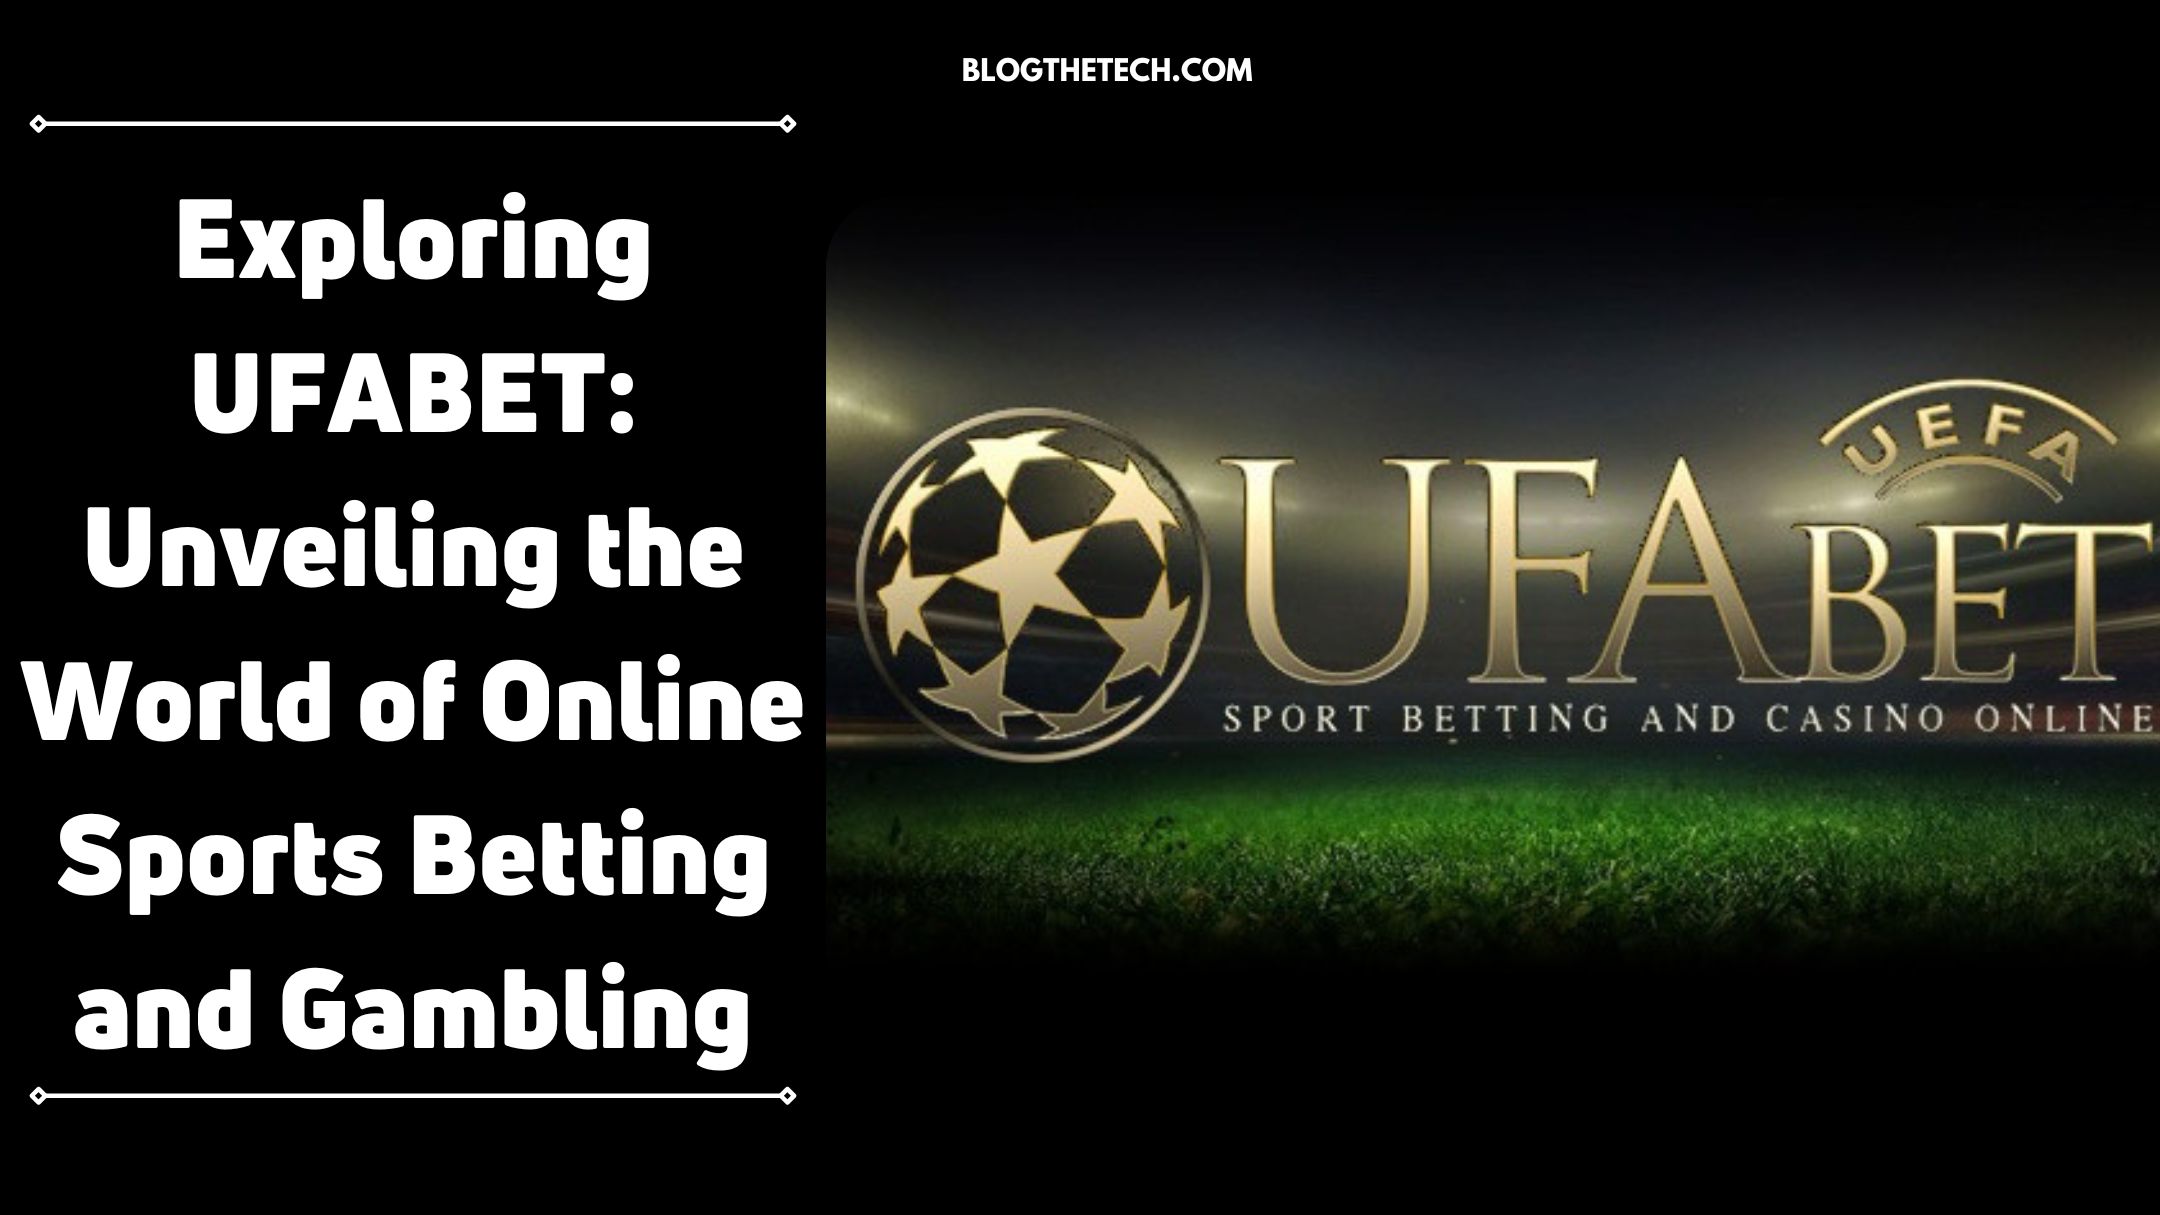 ufabet-world-of-online-sports-betting-and-gambling-featured